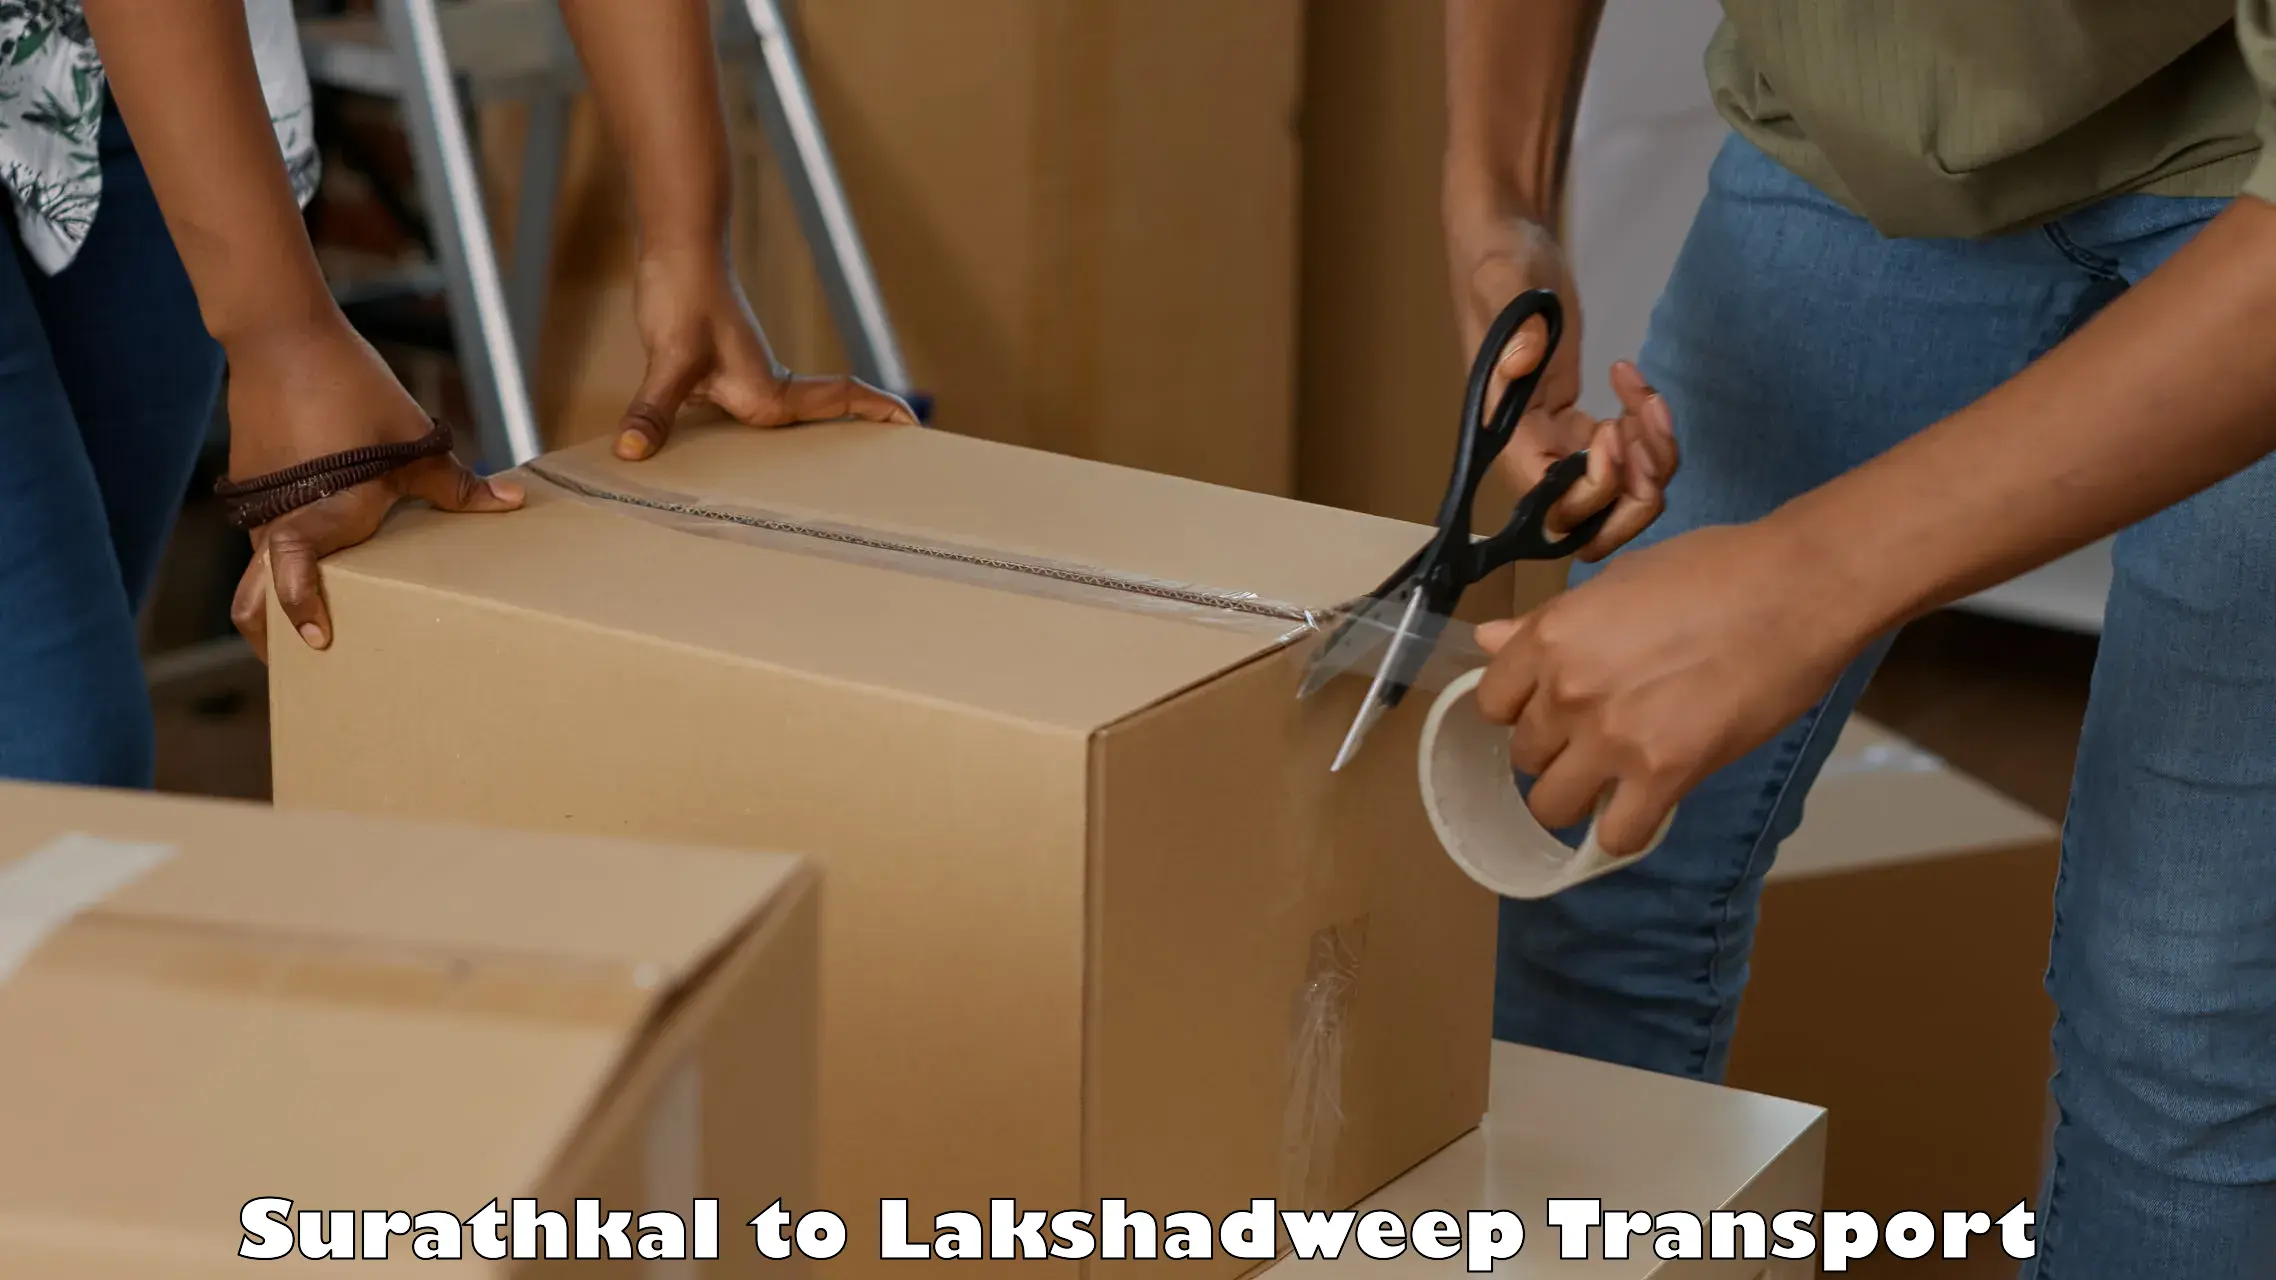 Daily parcel service transport Surathkal to Lakshadweep